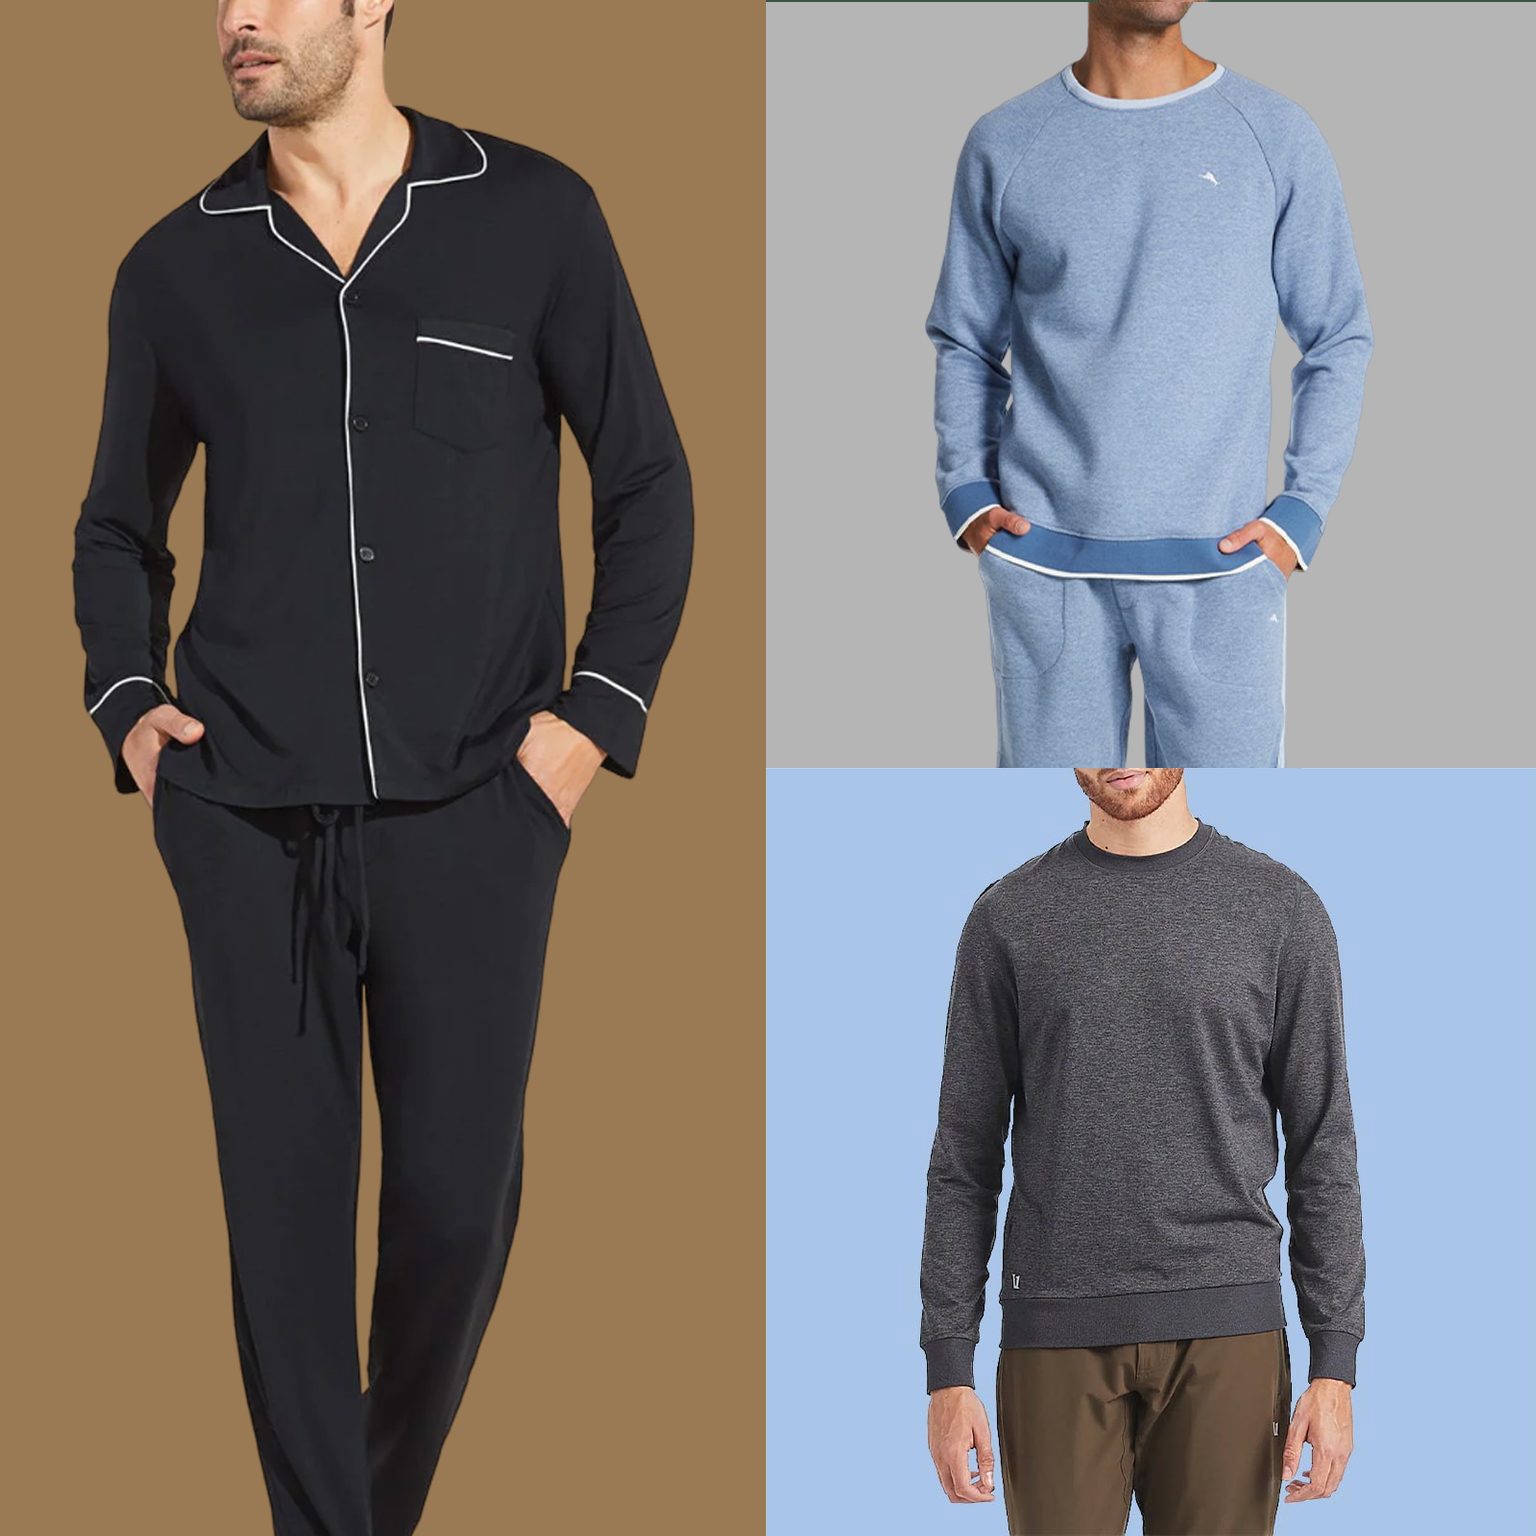 Tommy John Loungewear Review: Airy and breathable - Reviewed